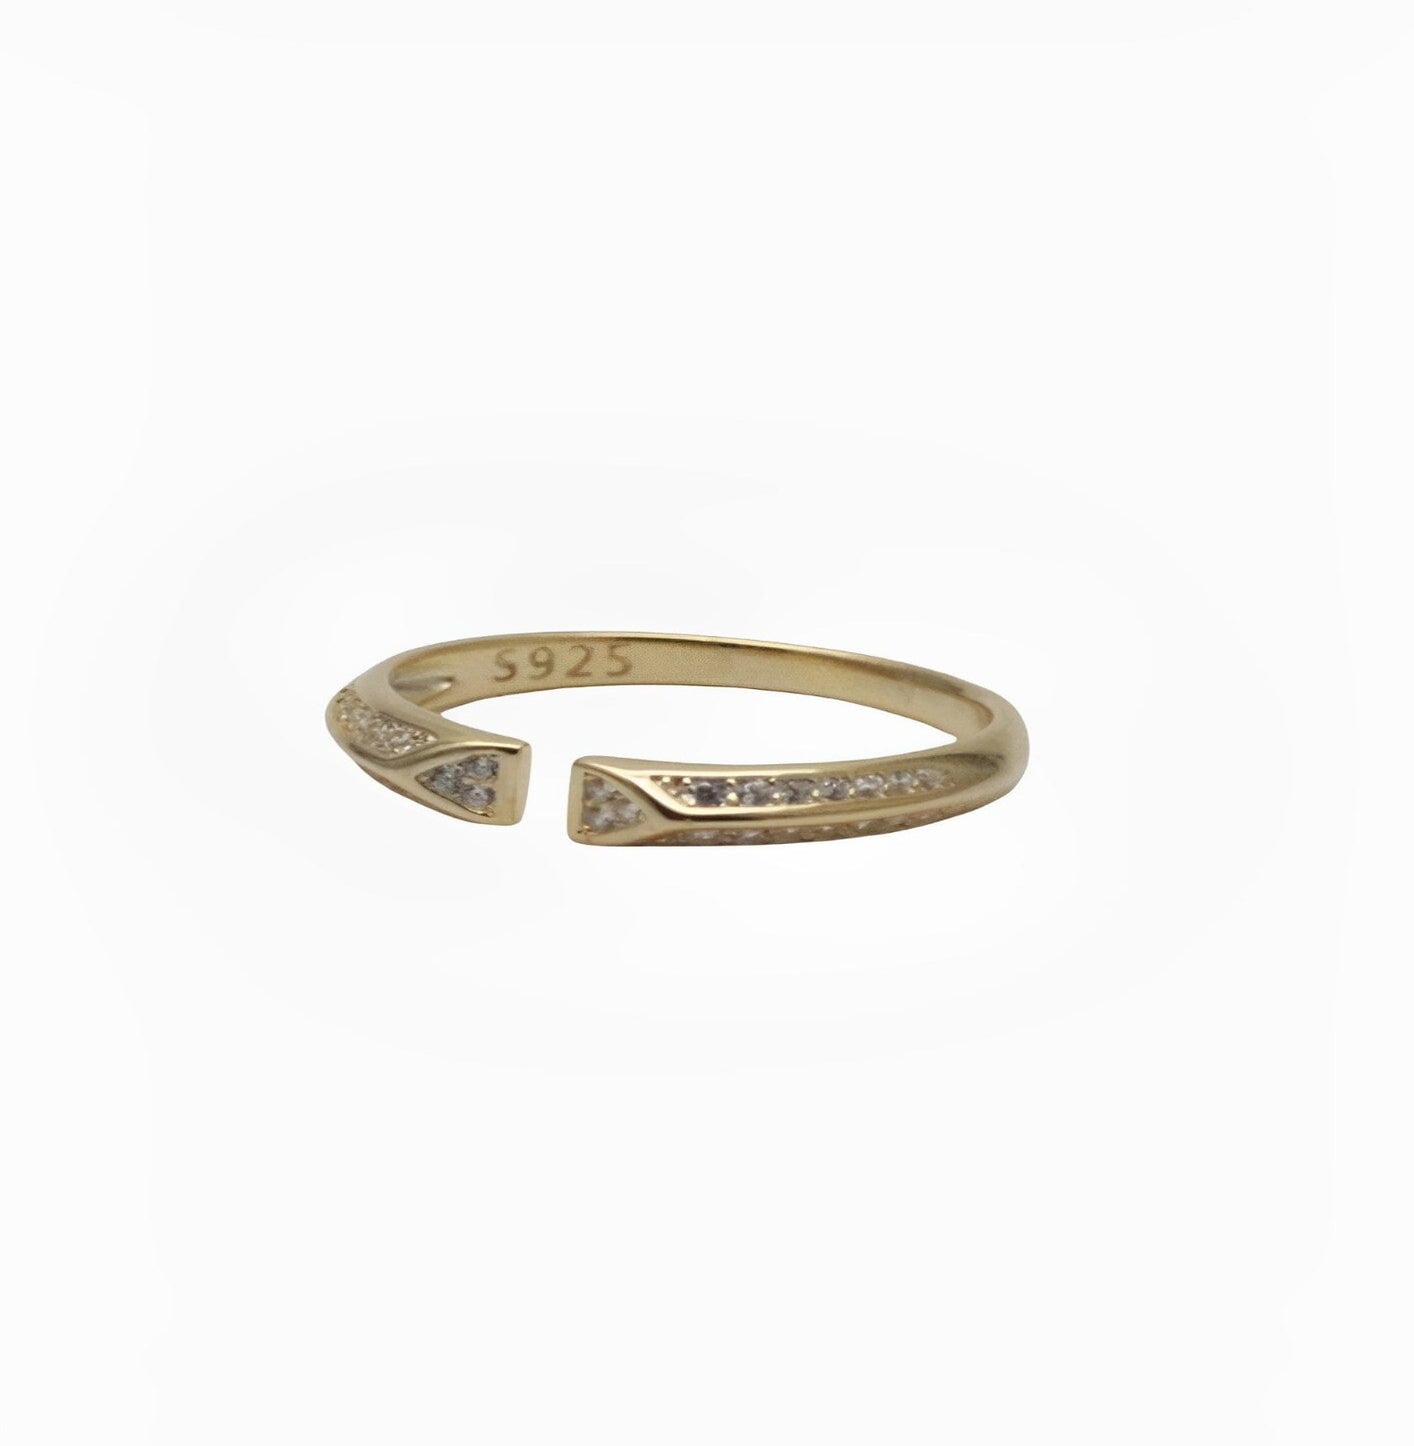 DOLA RING neck Yubama Jewelry Online Store - The Elegant Designs of Gold and Silver ! 